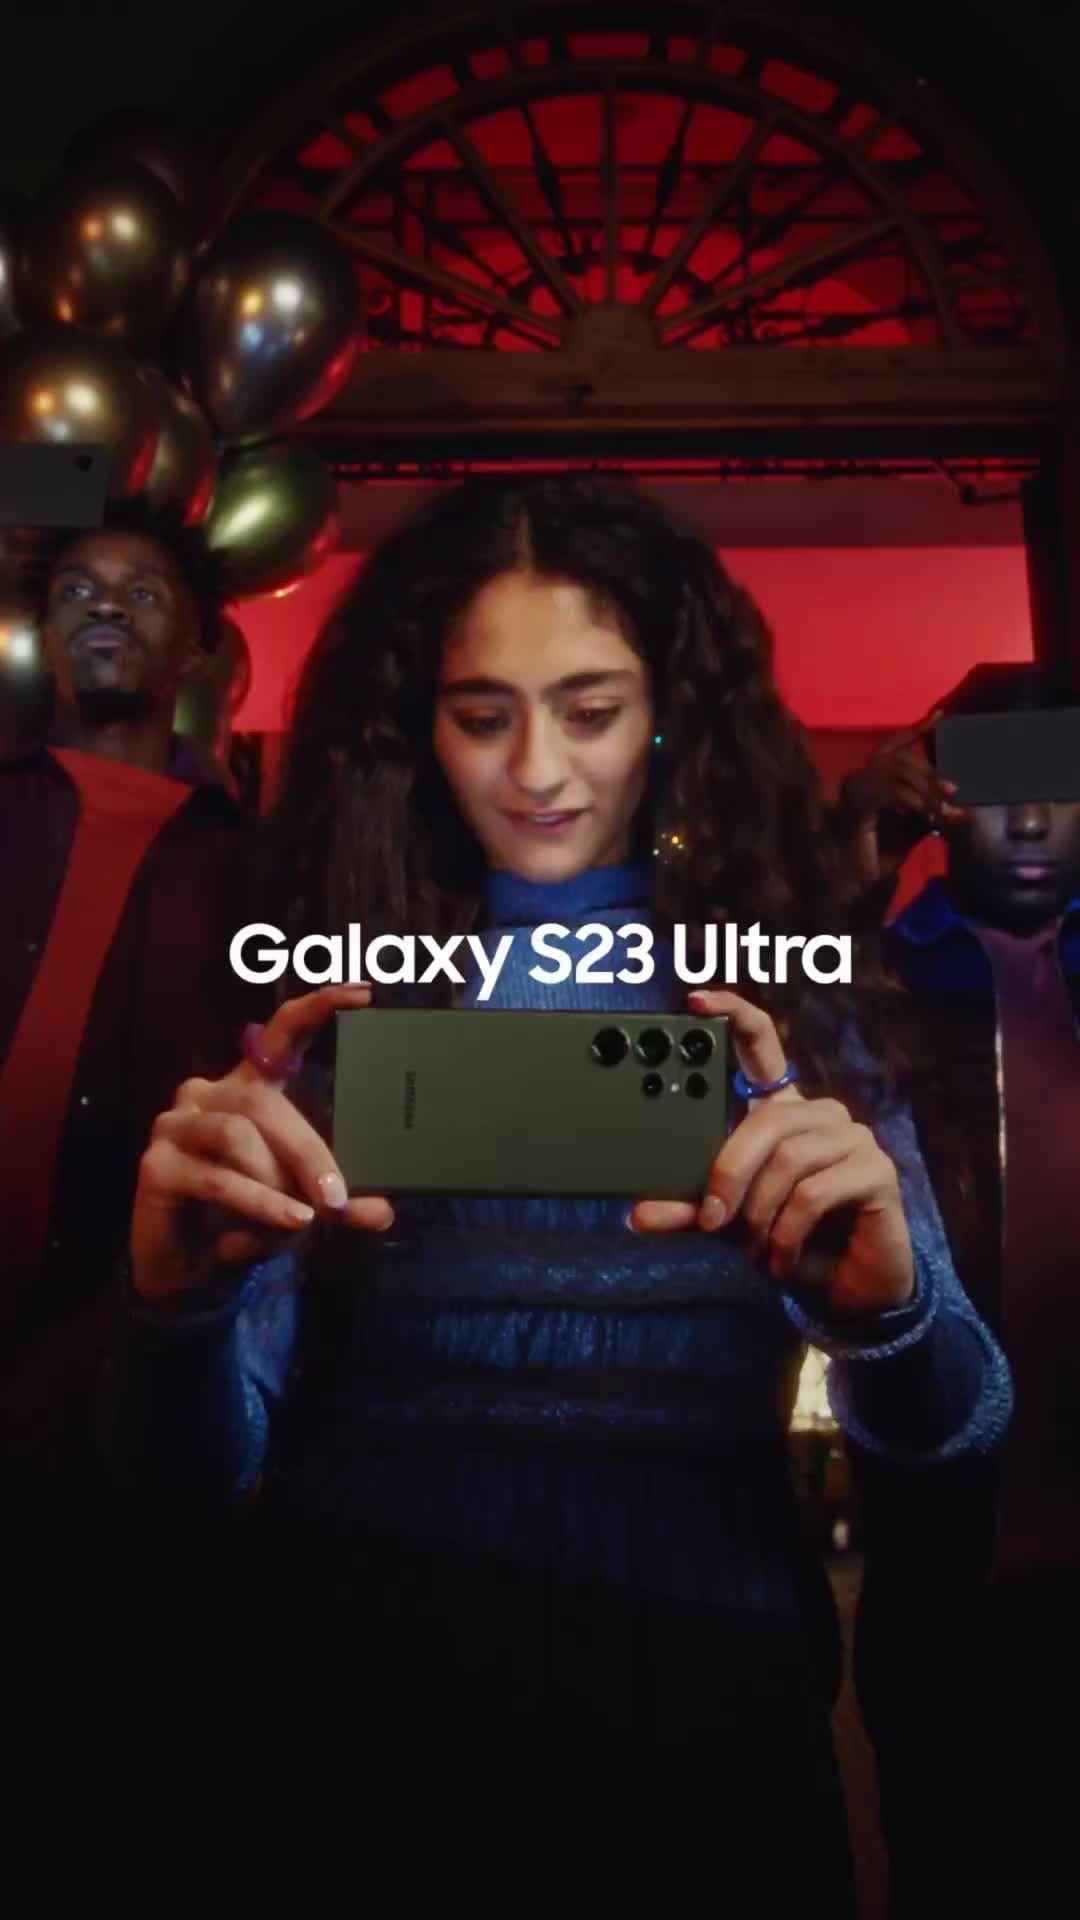 class="content__text"
 Get ready to hear 'Can you send me that?' when you capture the most epic shots - even at night - with the new #GalaxyS23 Ultra's Nightography.
 #SharetheEpic #SamsungUnpacked 
 